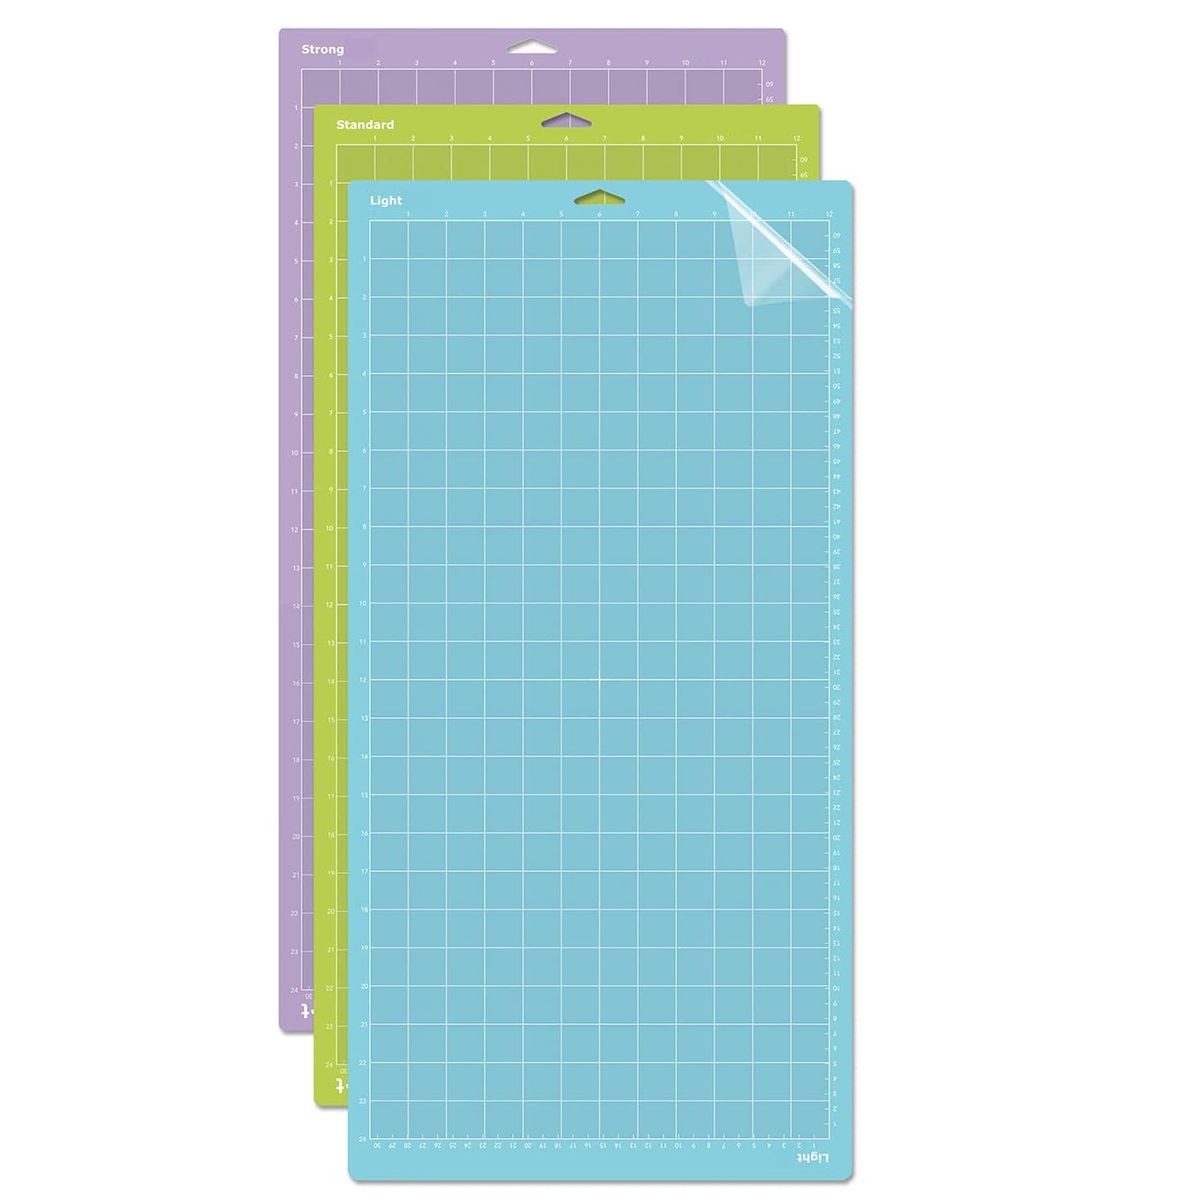 Cricut Cutting Mat Variety 4 Pack, 12x24 in (Lightgrip, Standardgrip,  Fabricgrip, Stronggrip) Mats Compatible with Cricut Maker and Explore  Cutting